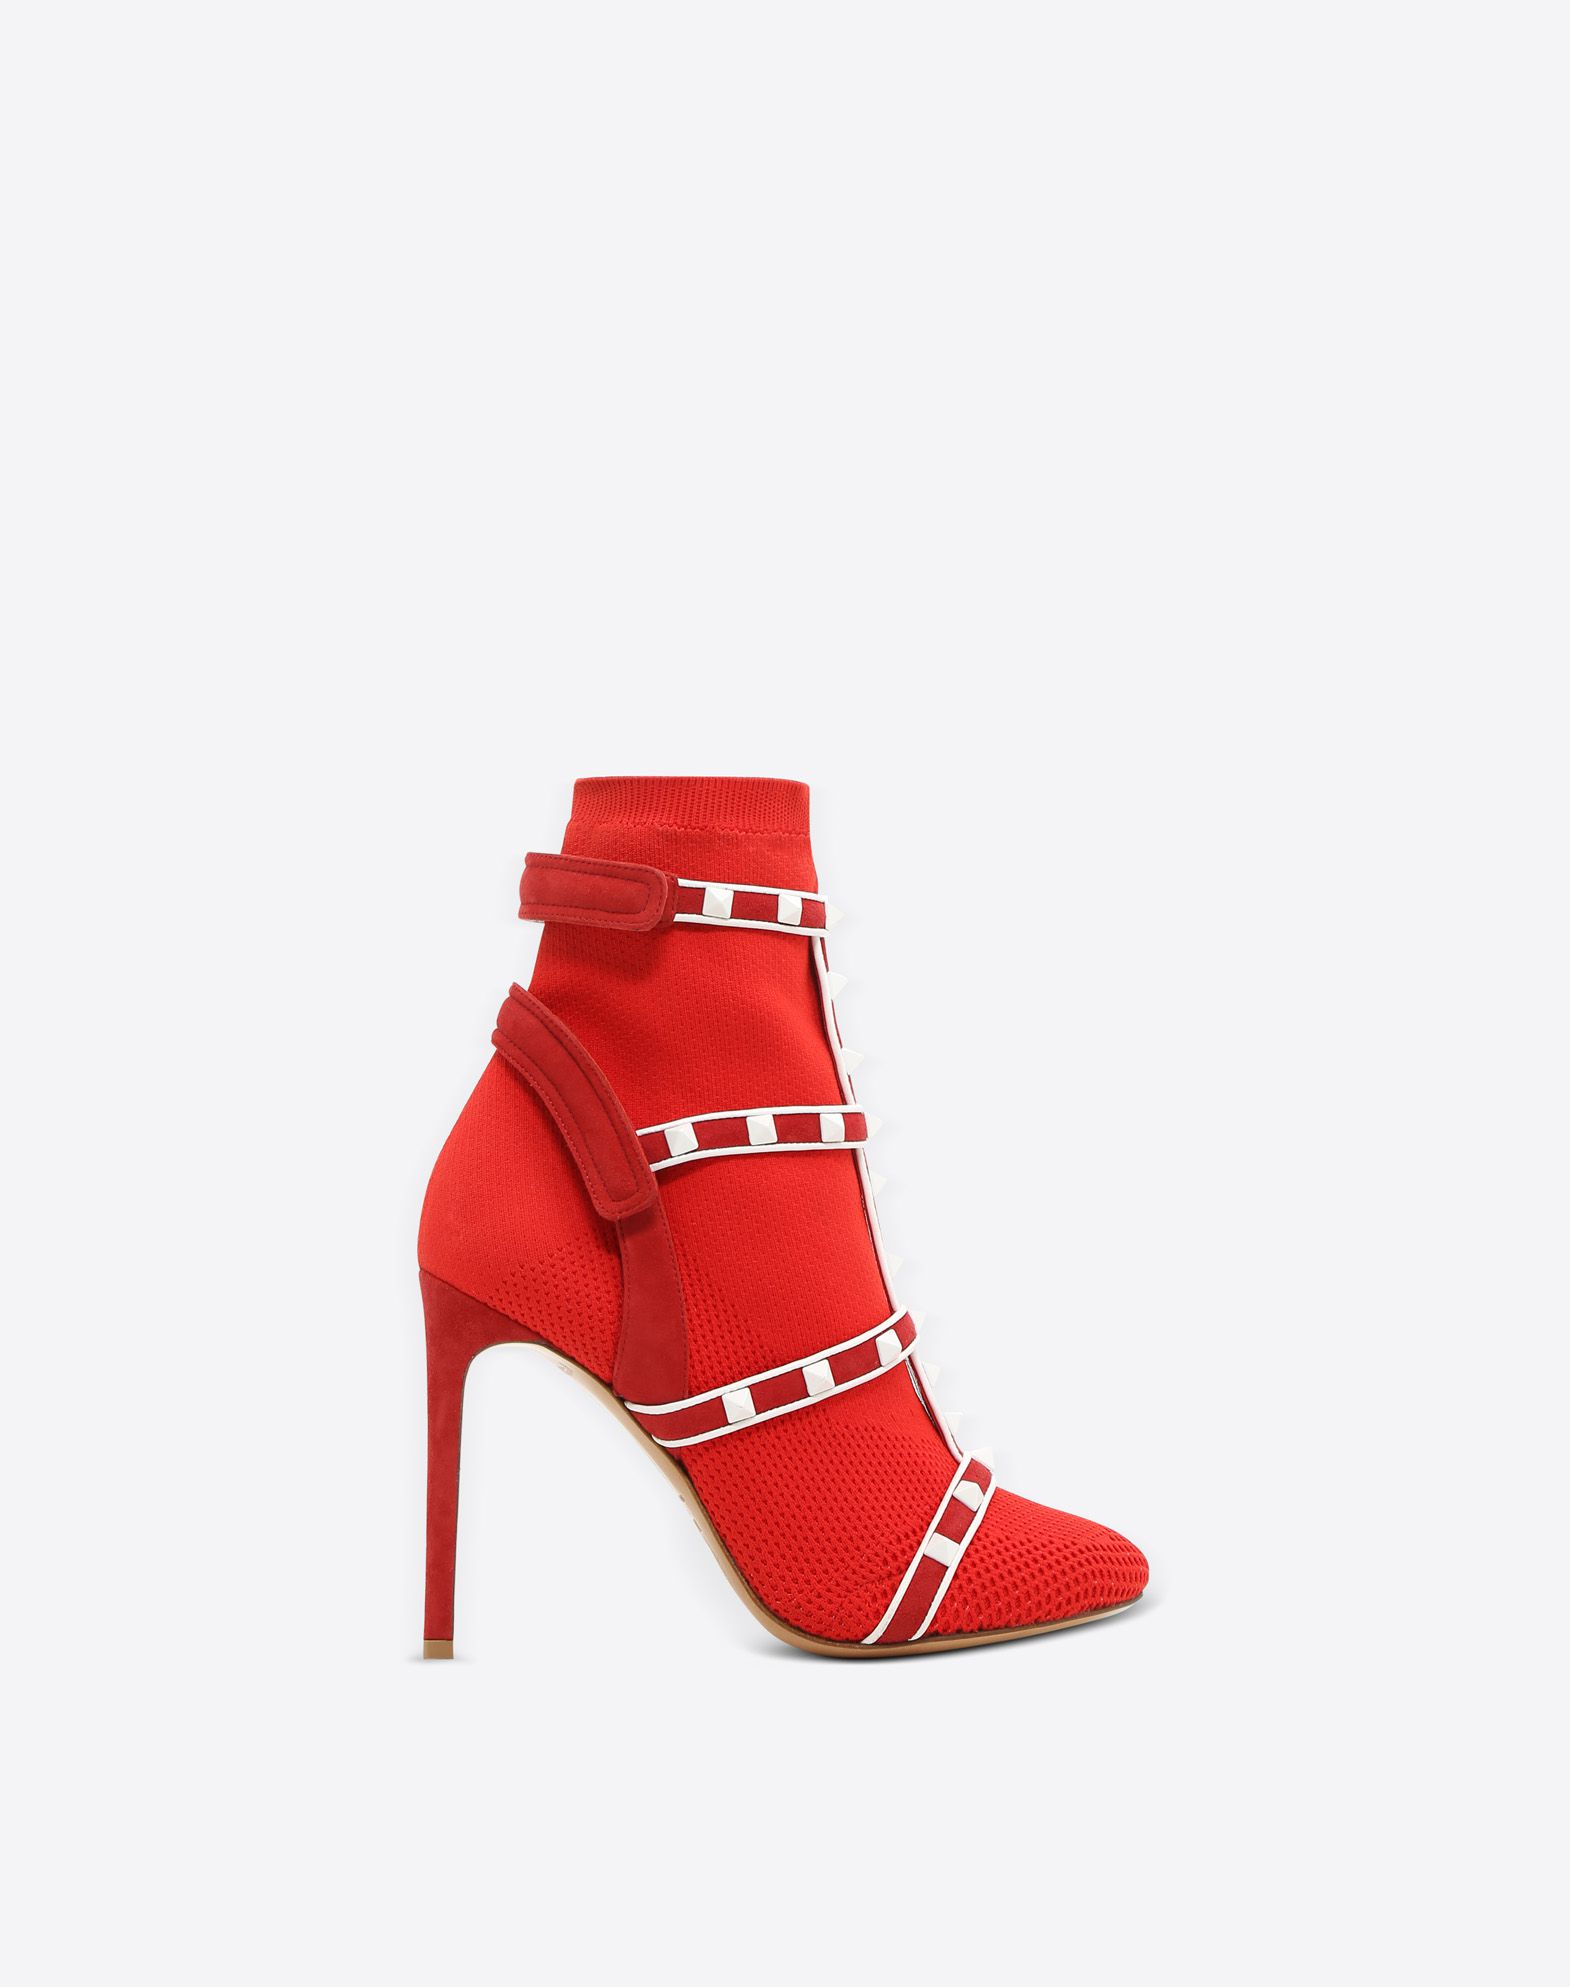 valentino red booties